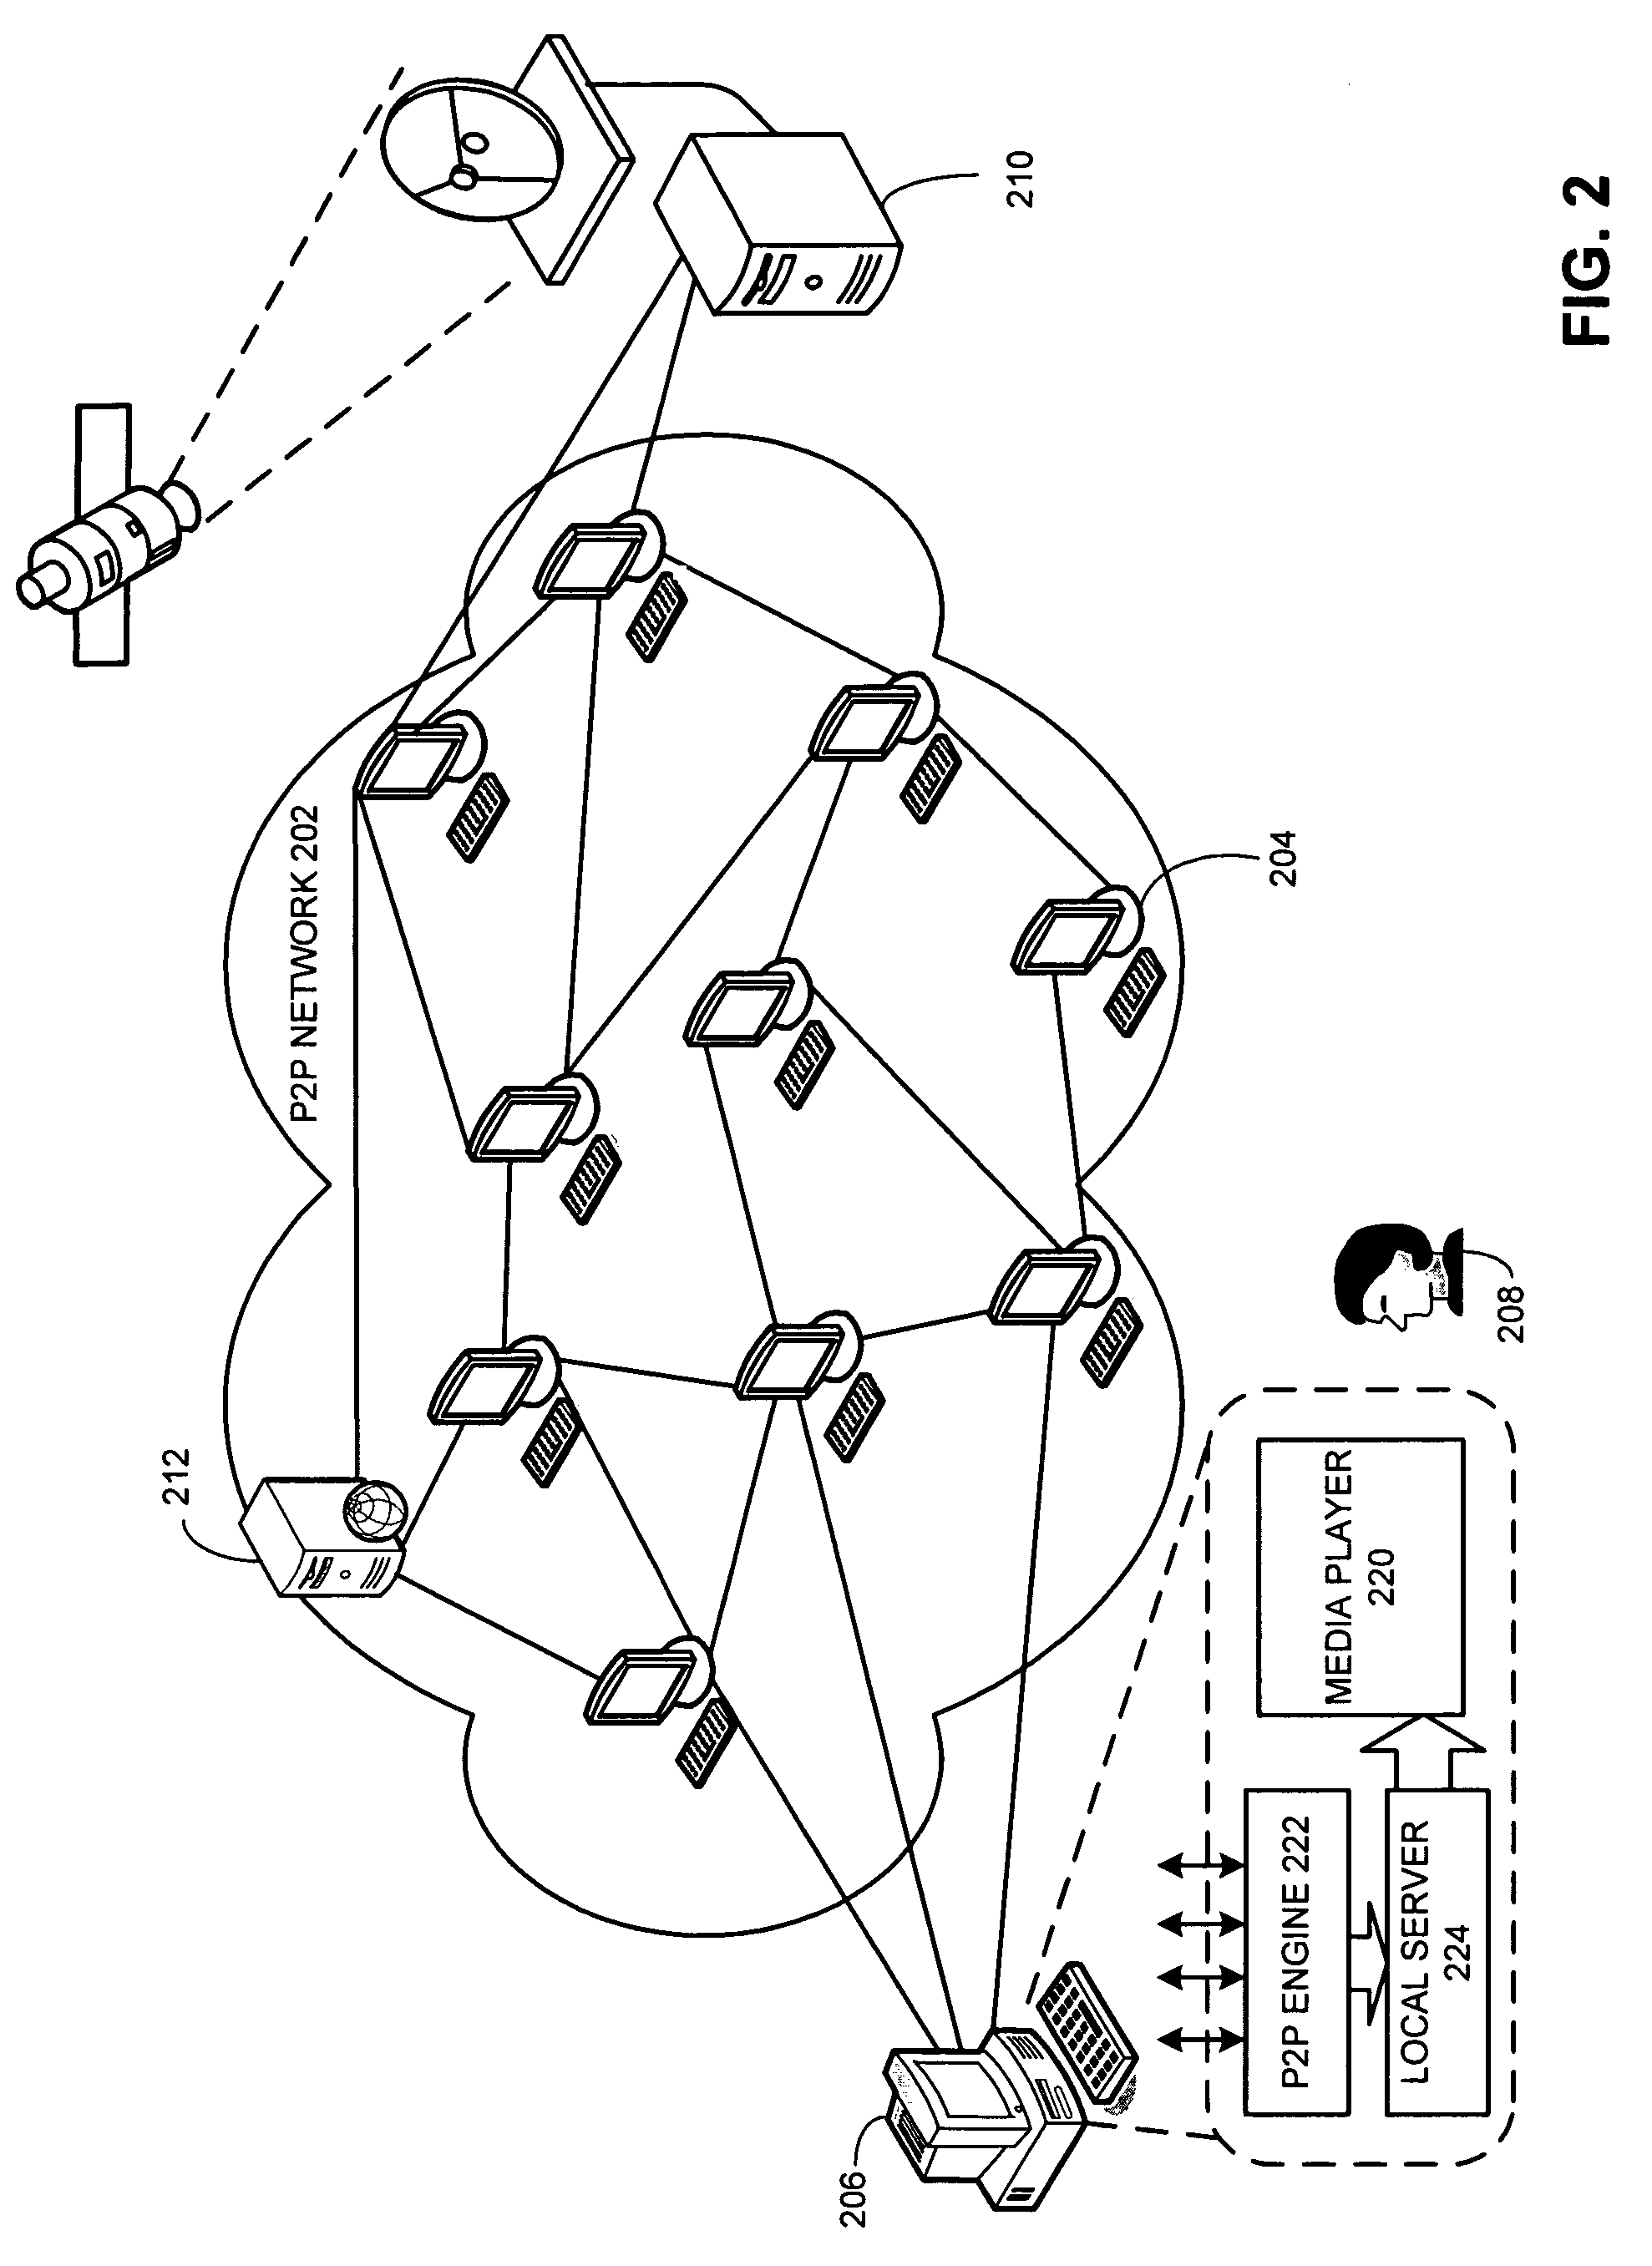 System and method for buffering real-time streaming content in a peer-to-peer overlay network